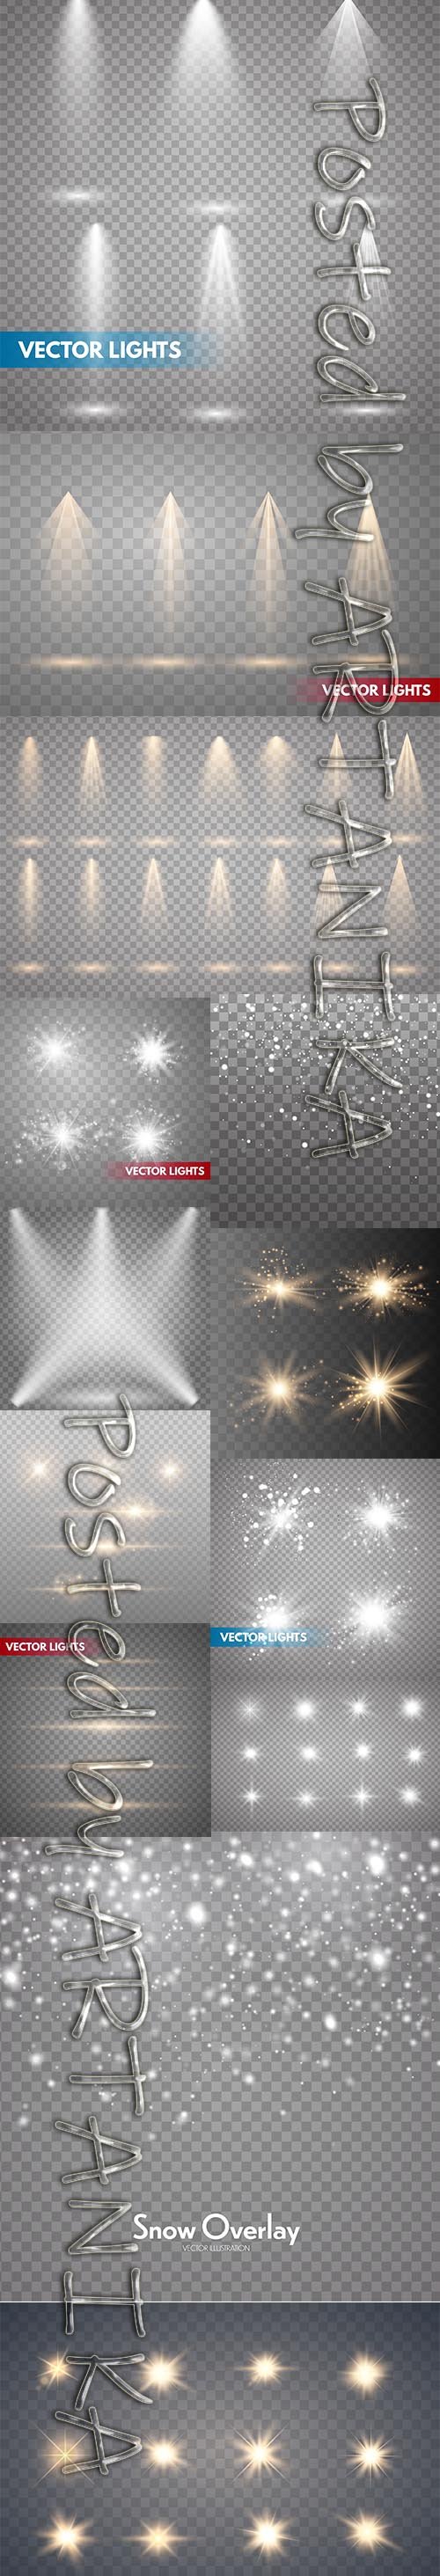 Set of Gold Sparks Isolated Vector Glowing Stars and Lights Vol 2